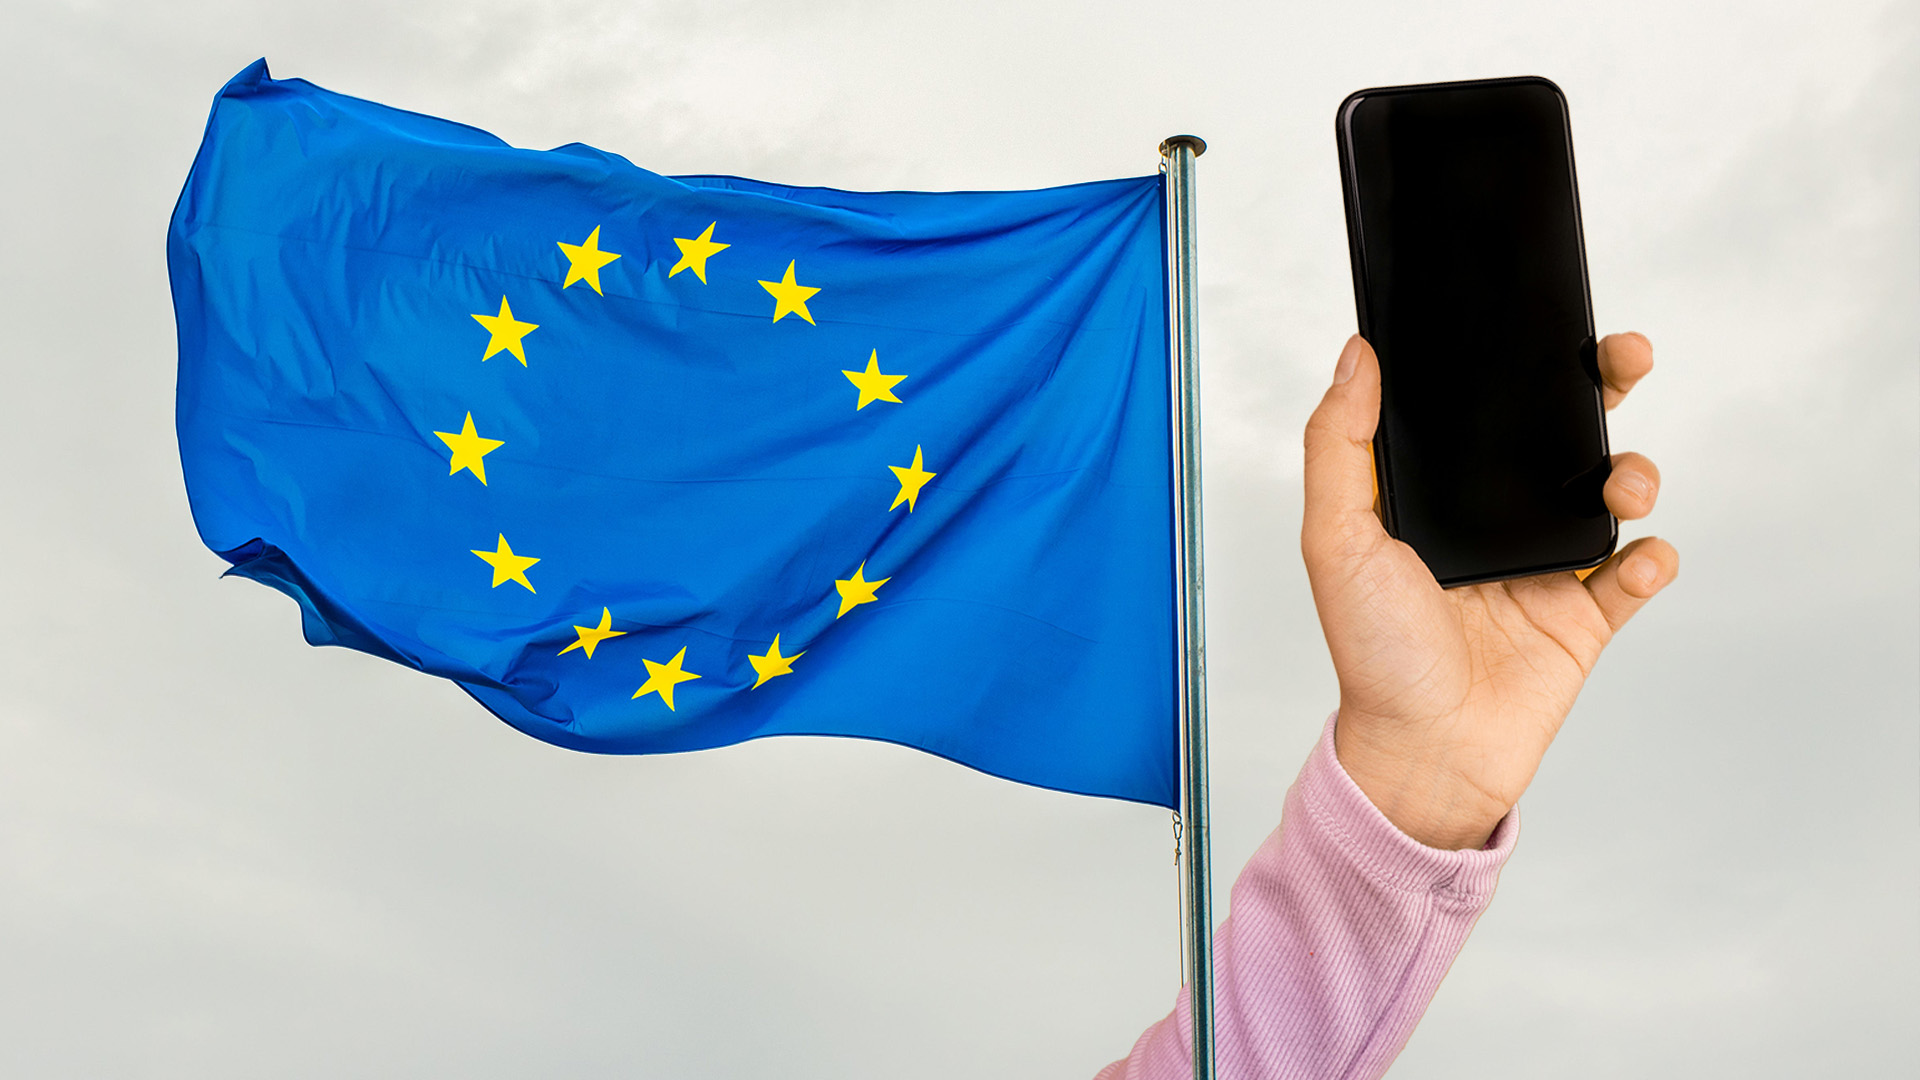 Maltese Most Likely in EU to Get News From Social Media